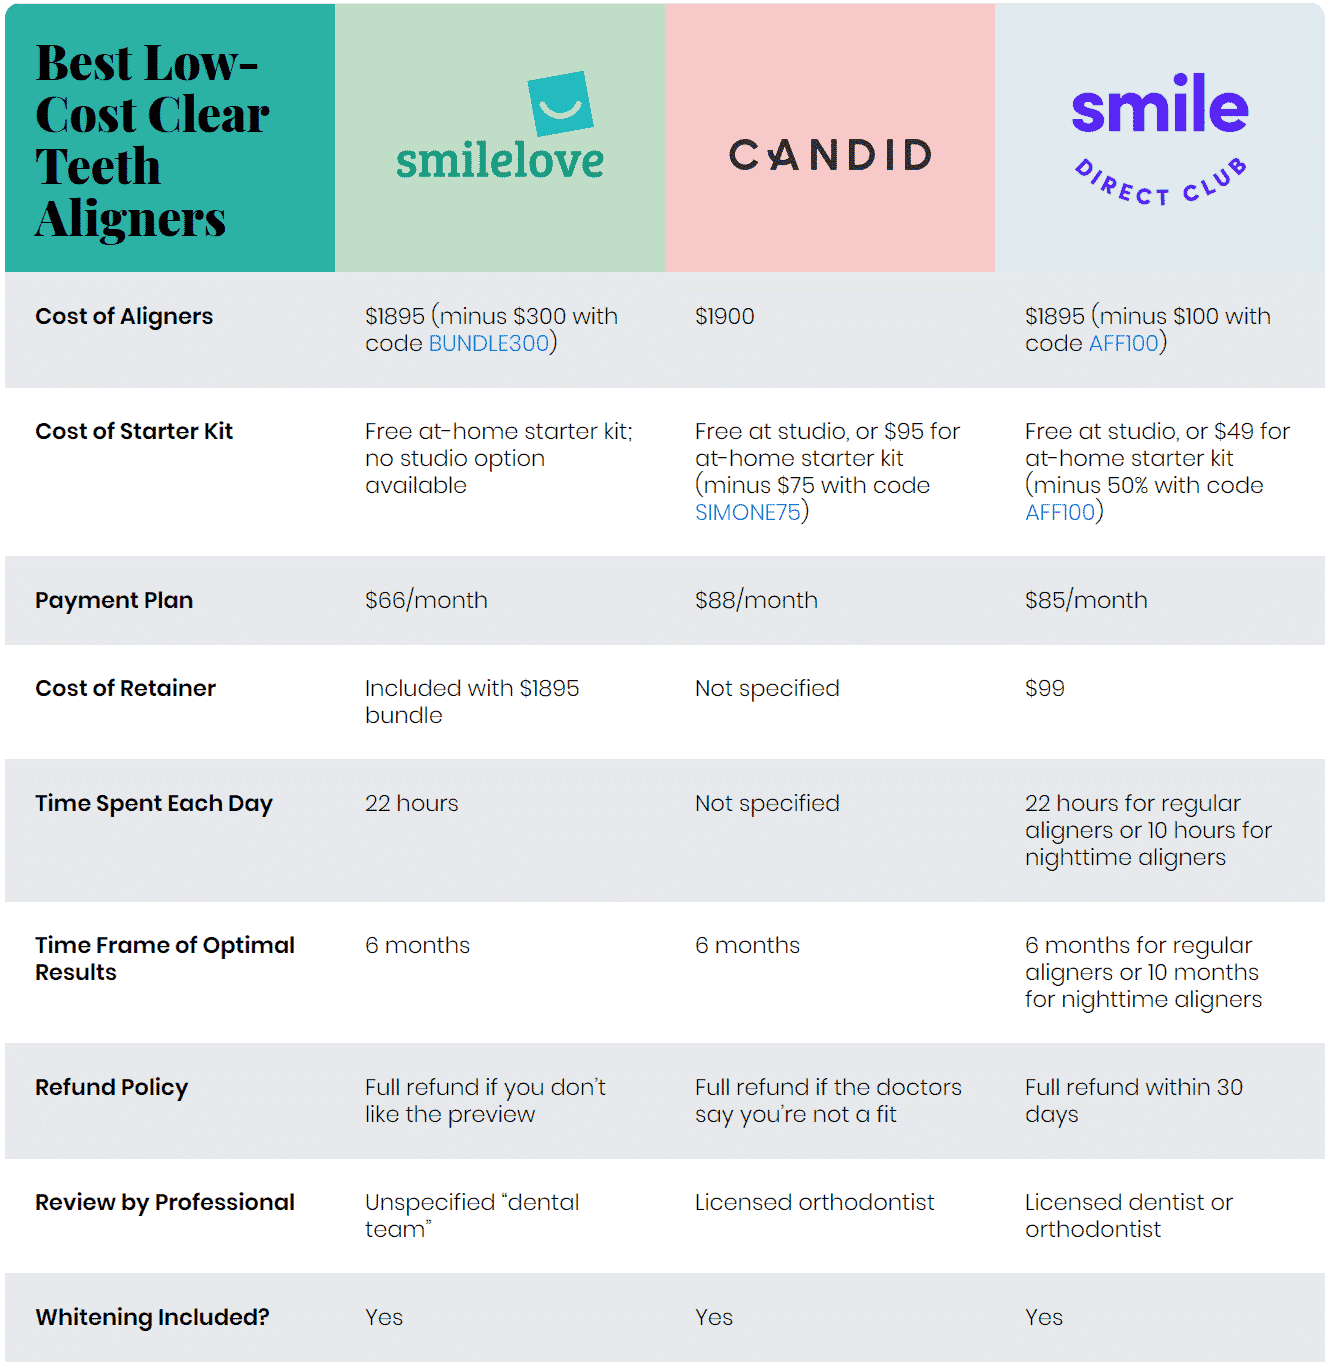 Candid vs Smile Direct Club: Comparing Low